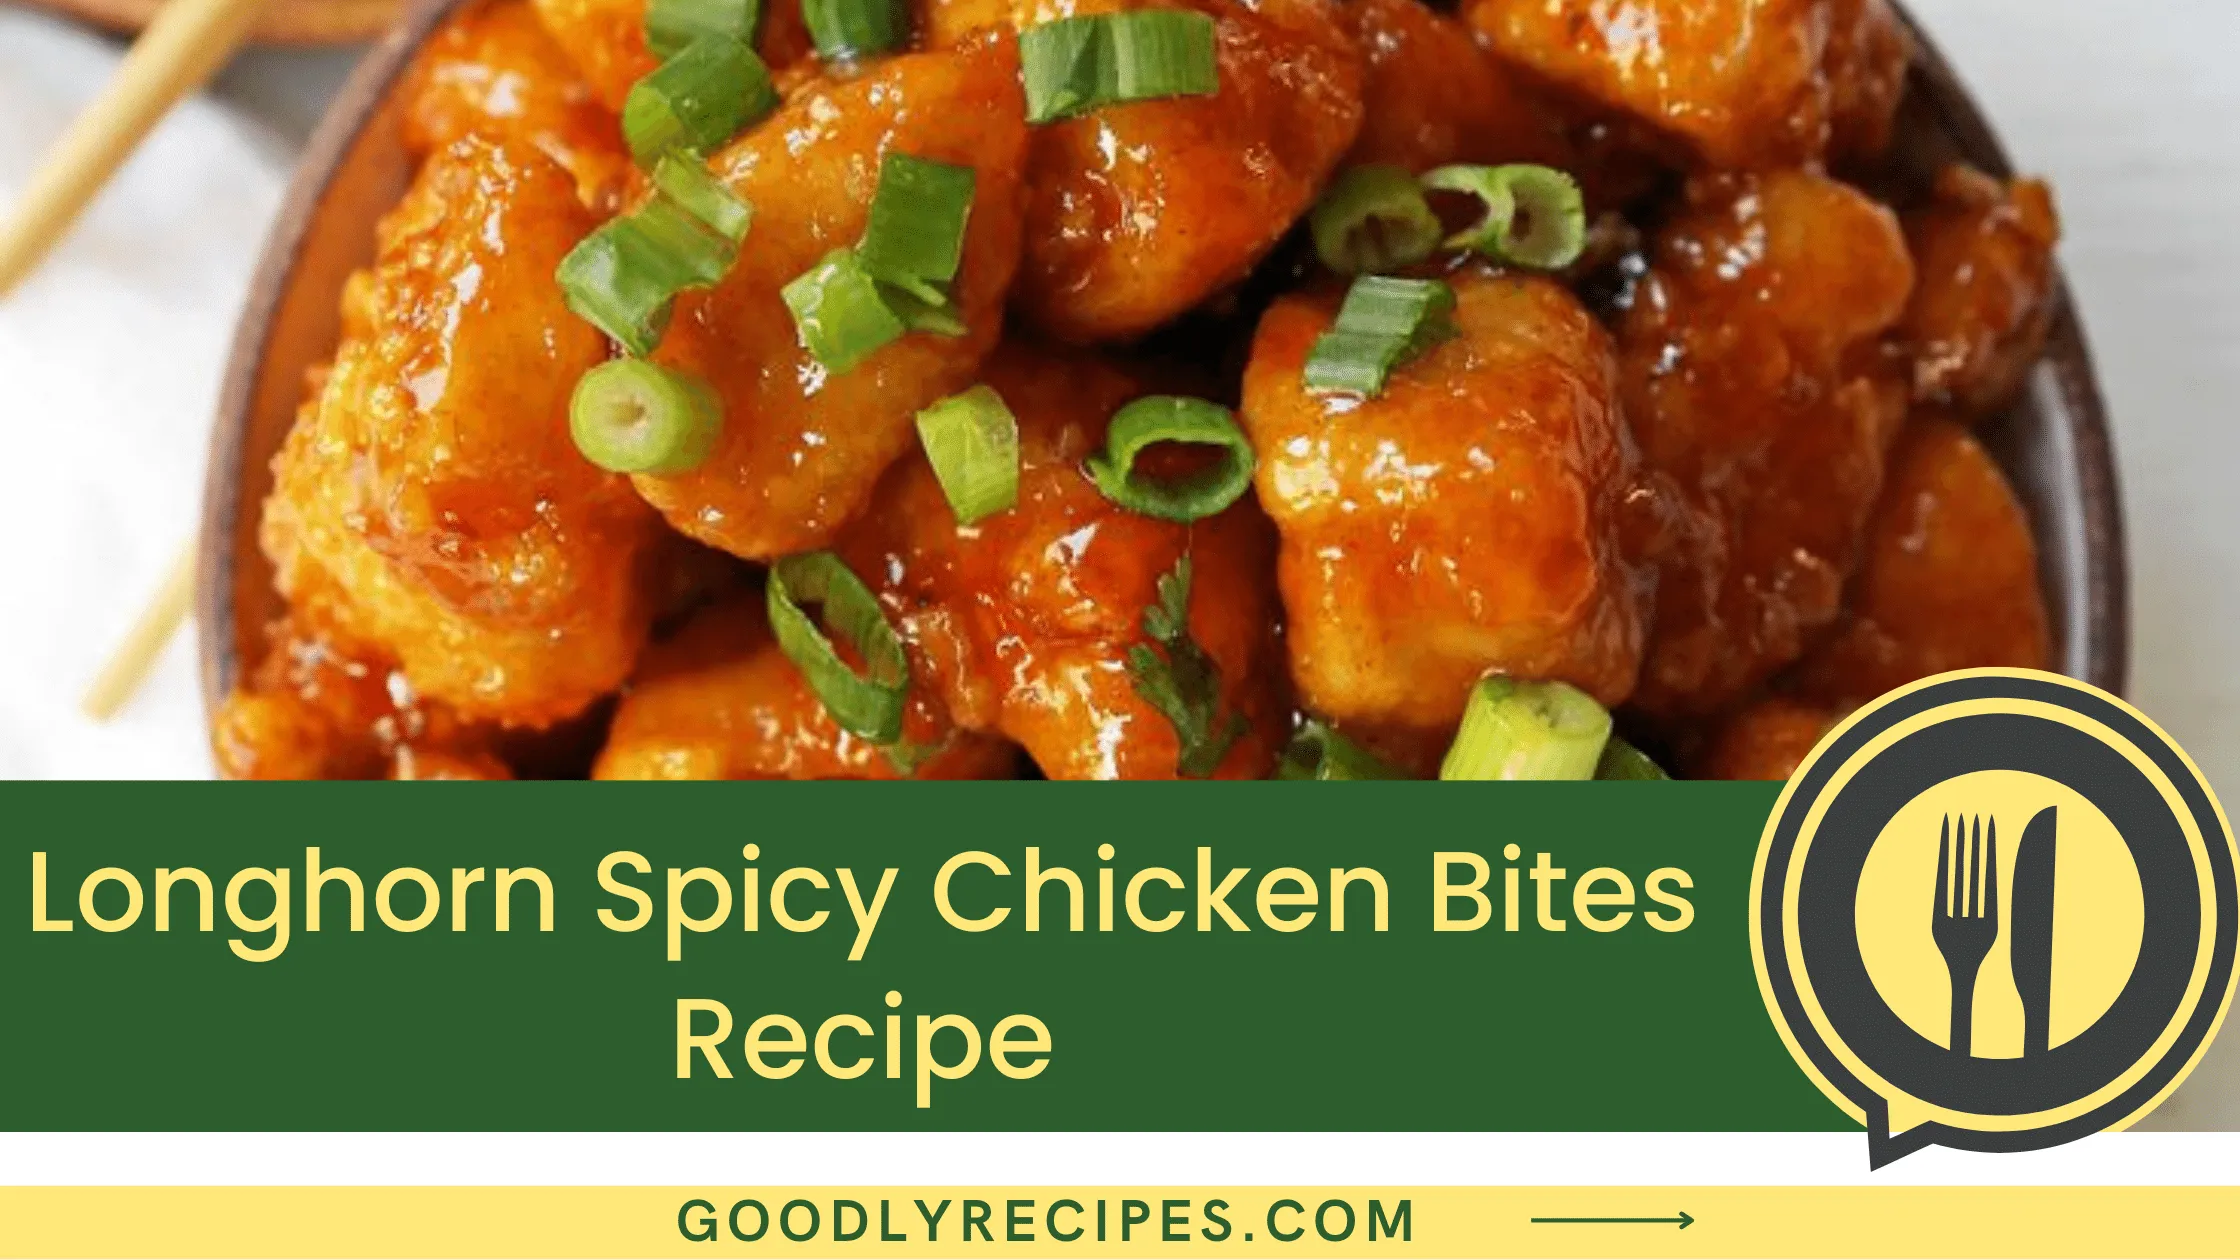 Longhorn Spicy Chicken Bites Recipe - For Food Lovers